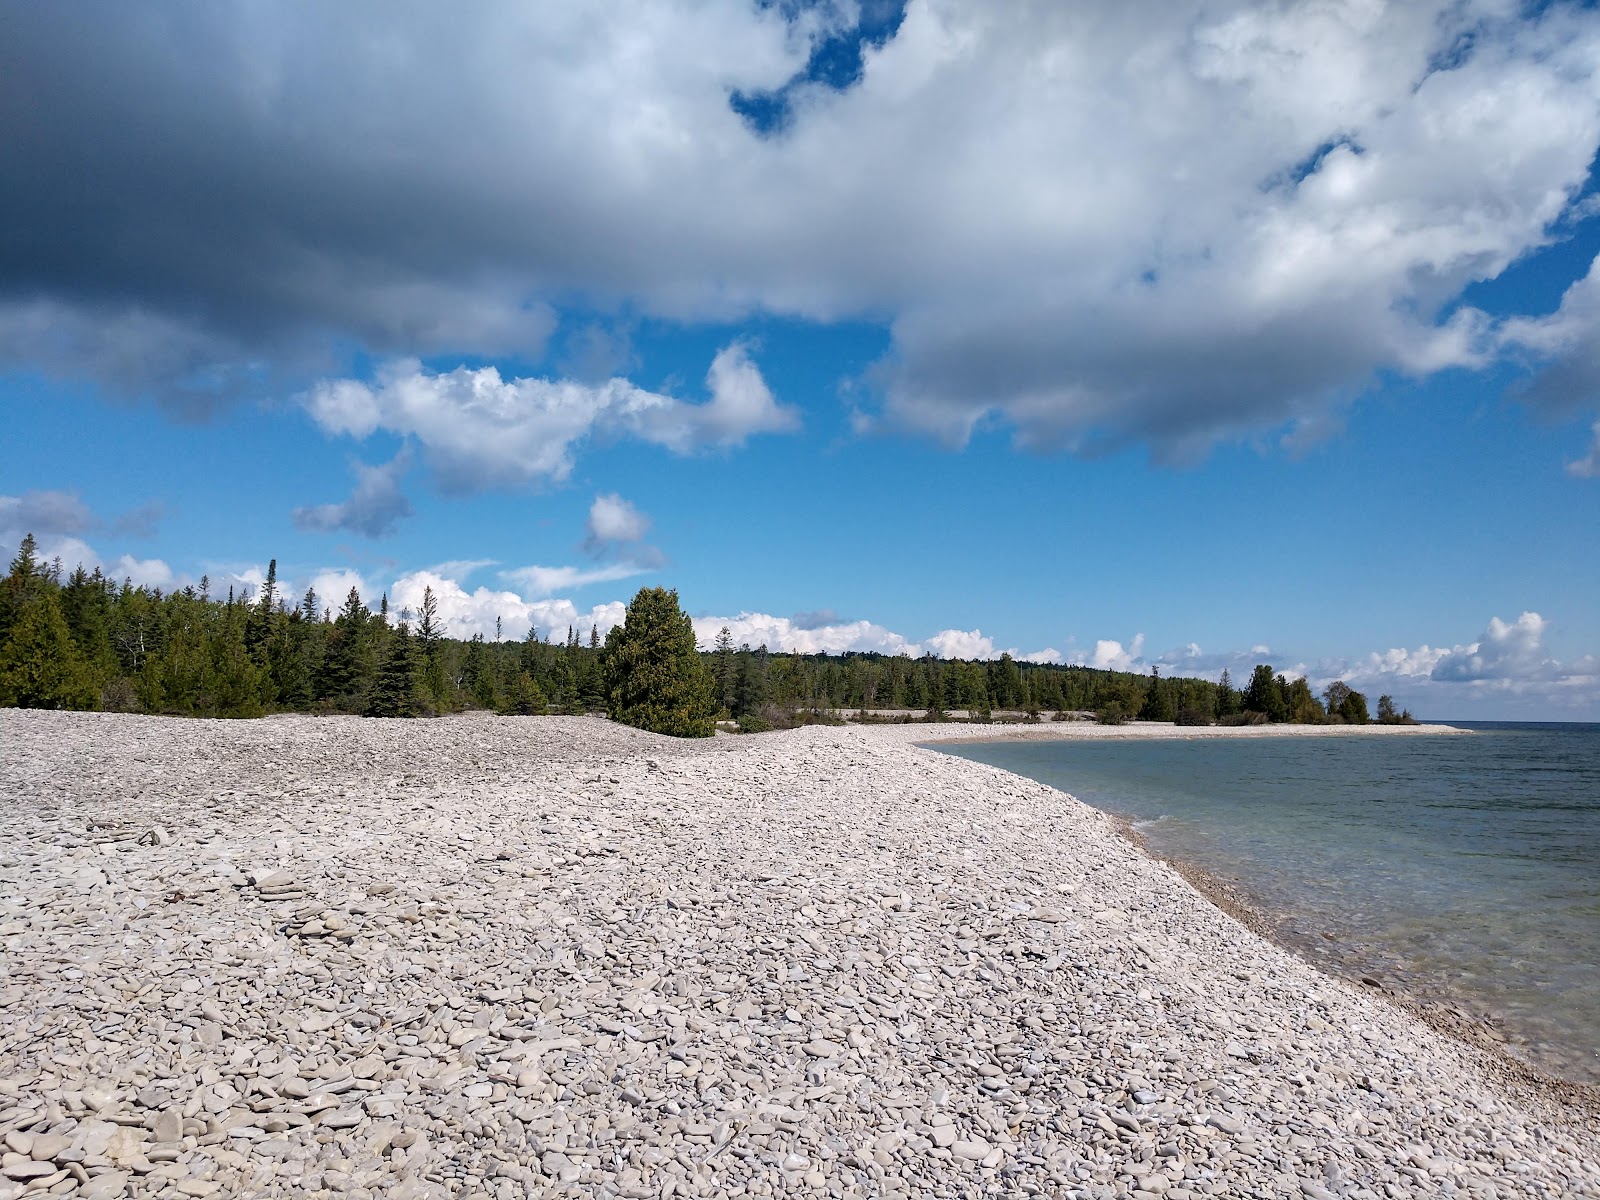 Photo of Shale Beach with gray pebble surface